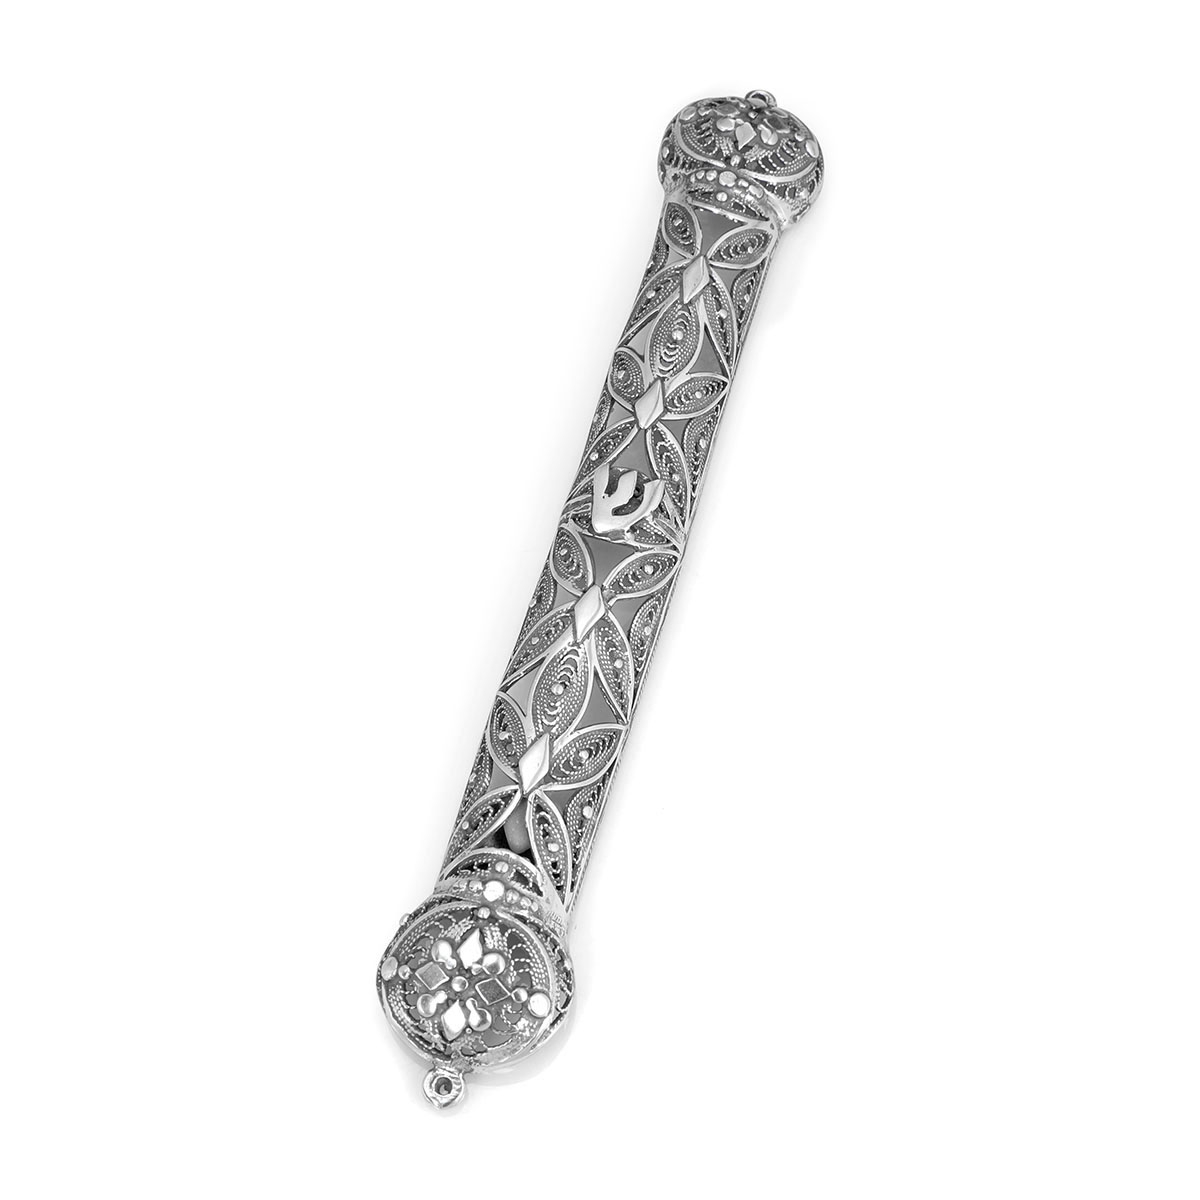 Traditional Yemenite Art Handcrafted Sterling Silver Mezuzah Case With Elaborate Filigree Design - 1